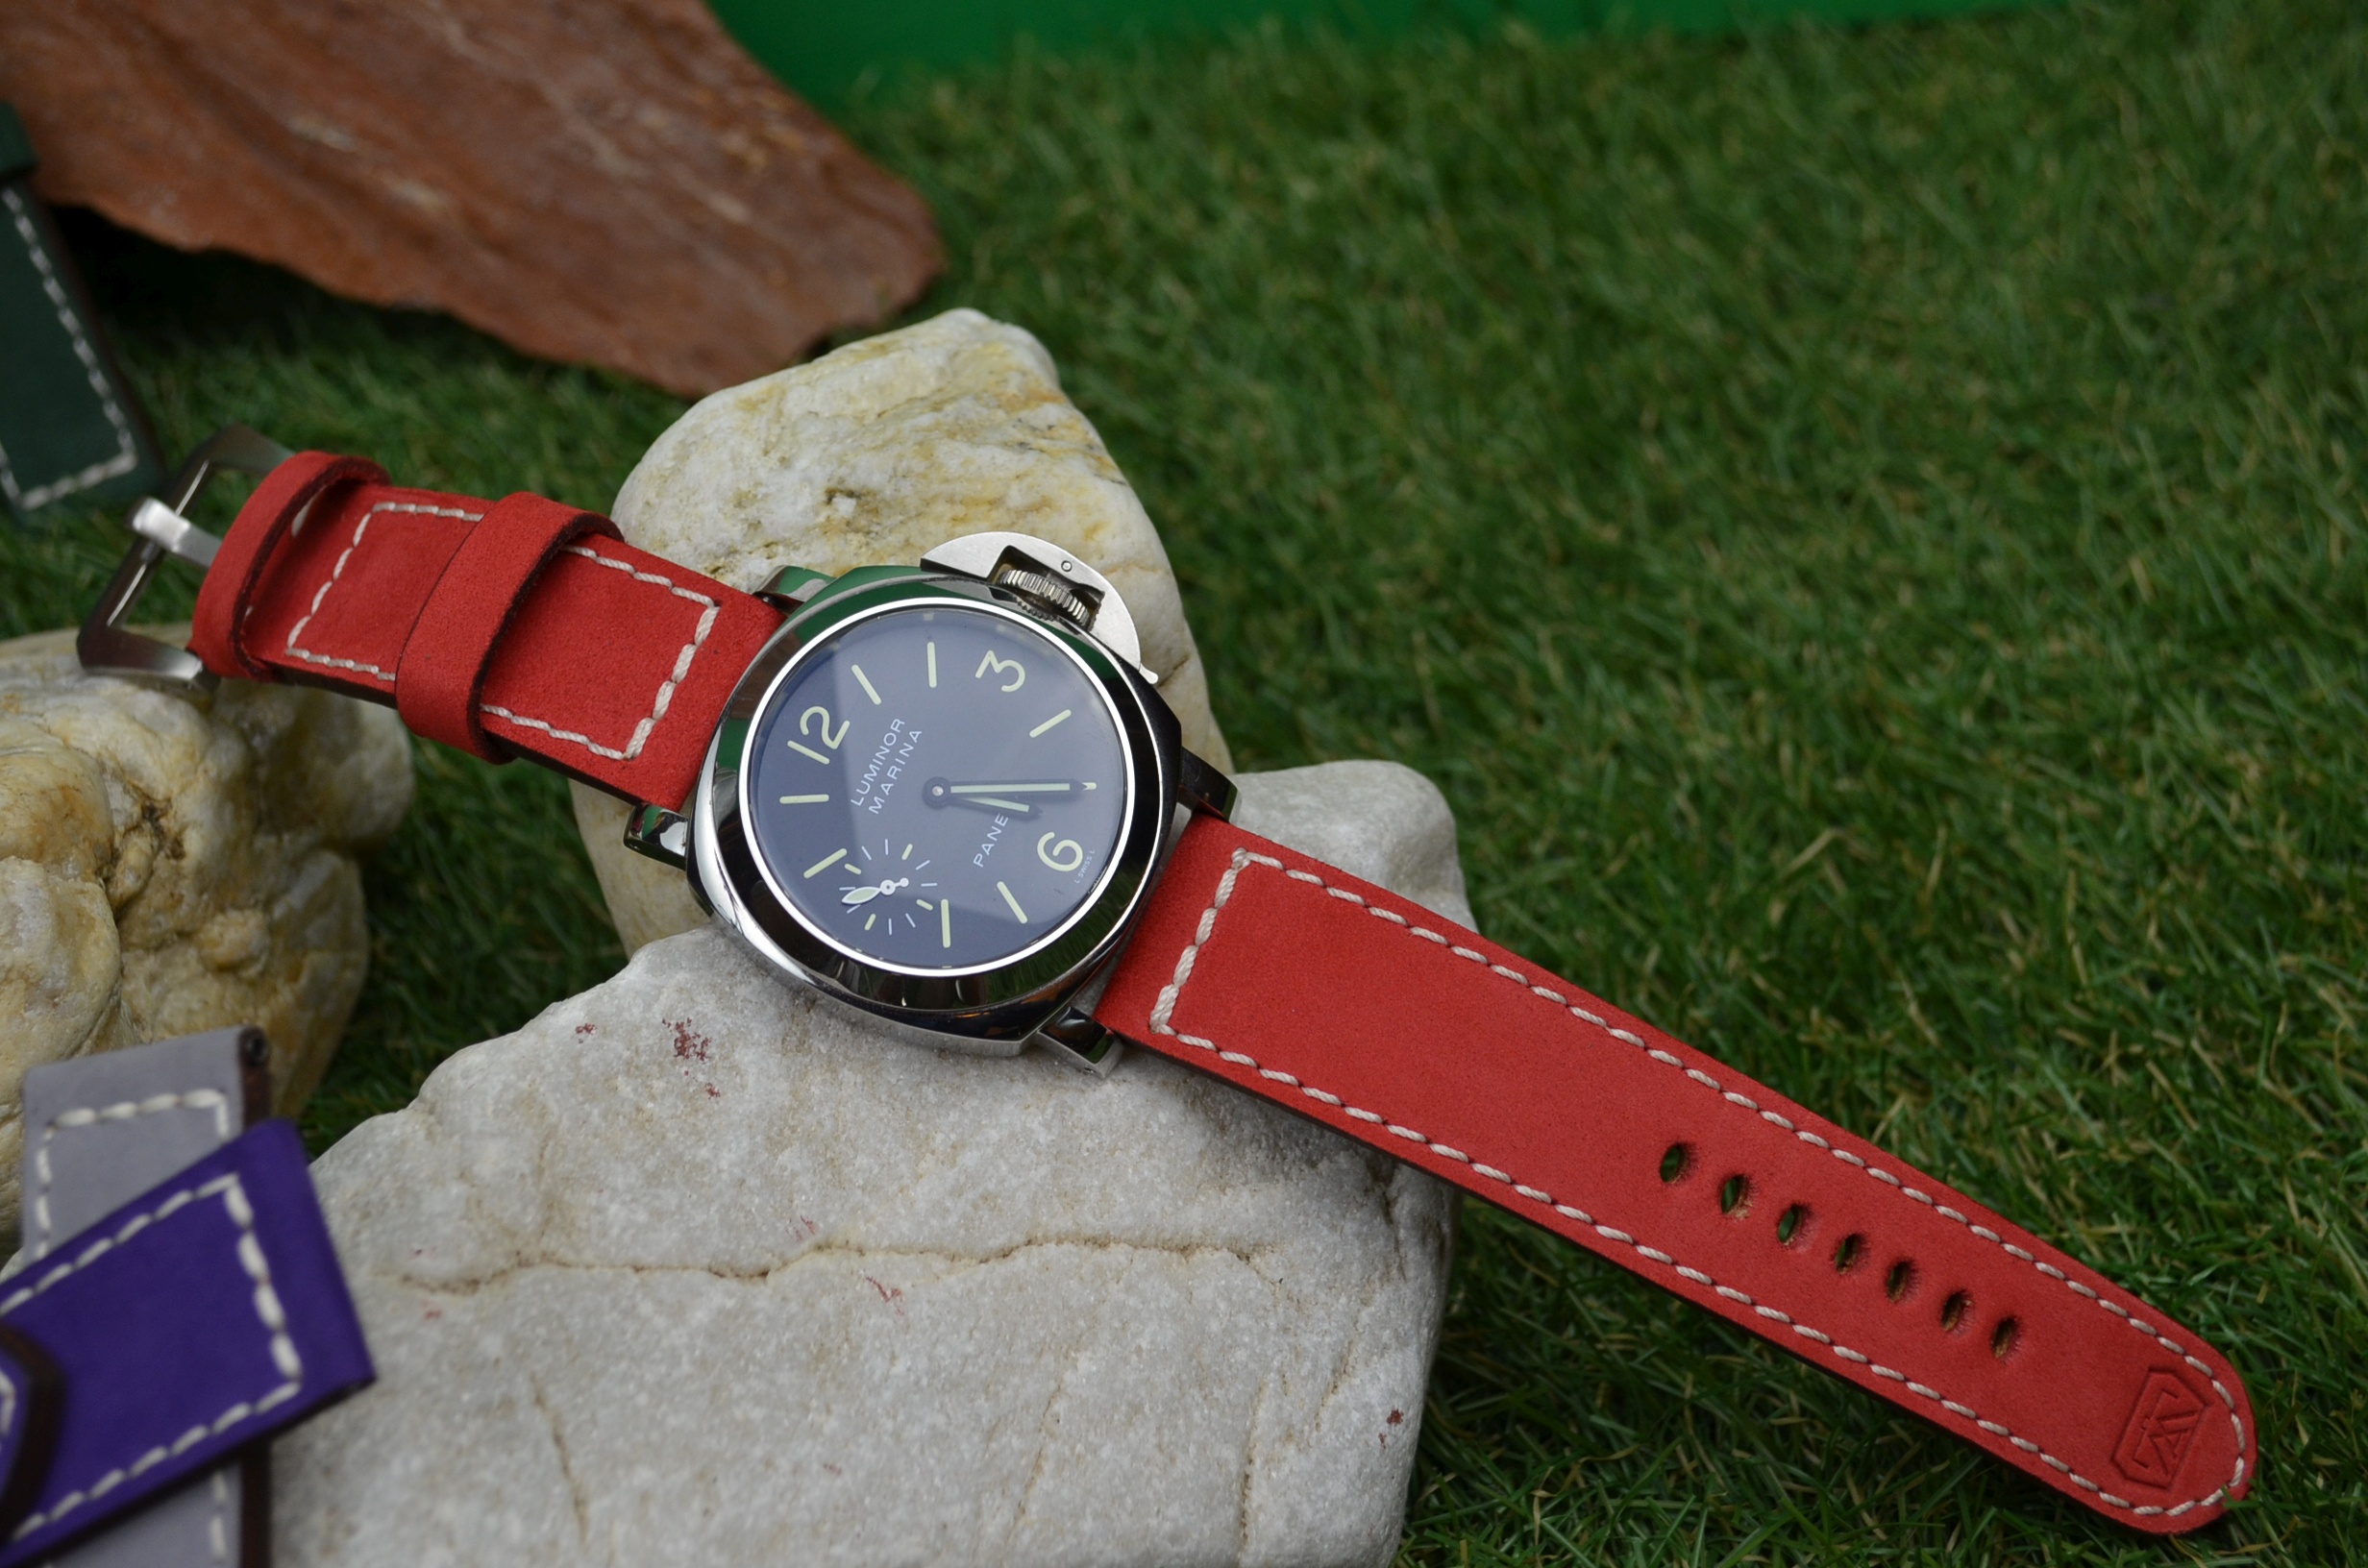 II RED is one of our hand crafted watch straps. Available in red color, 3.5 - 4 mm thick.